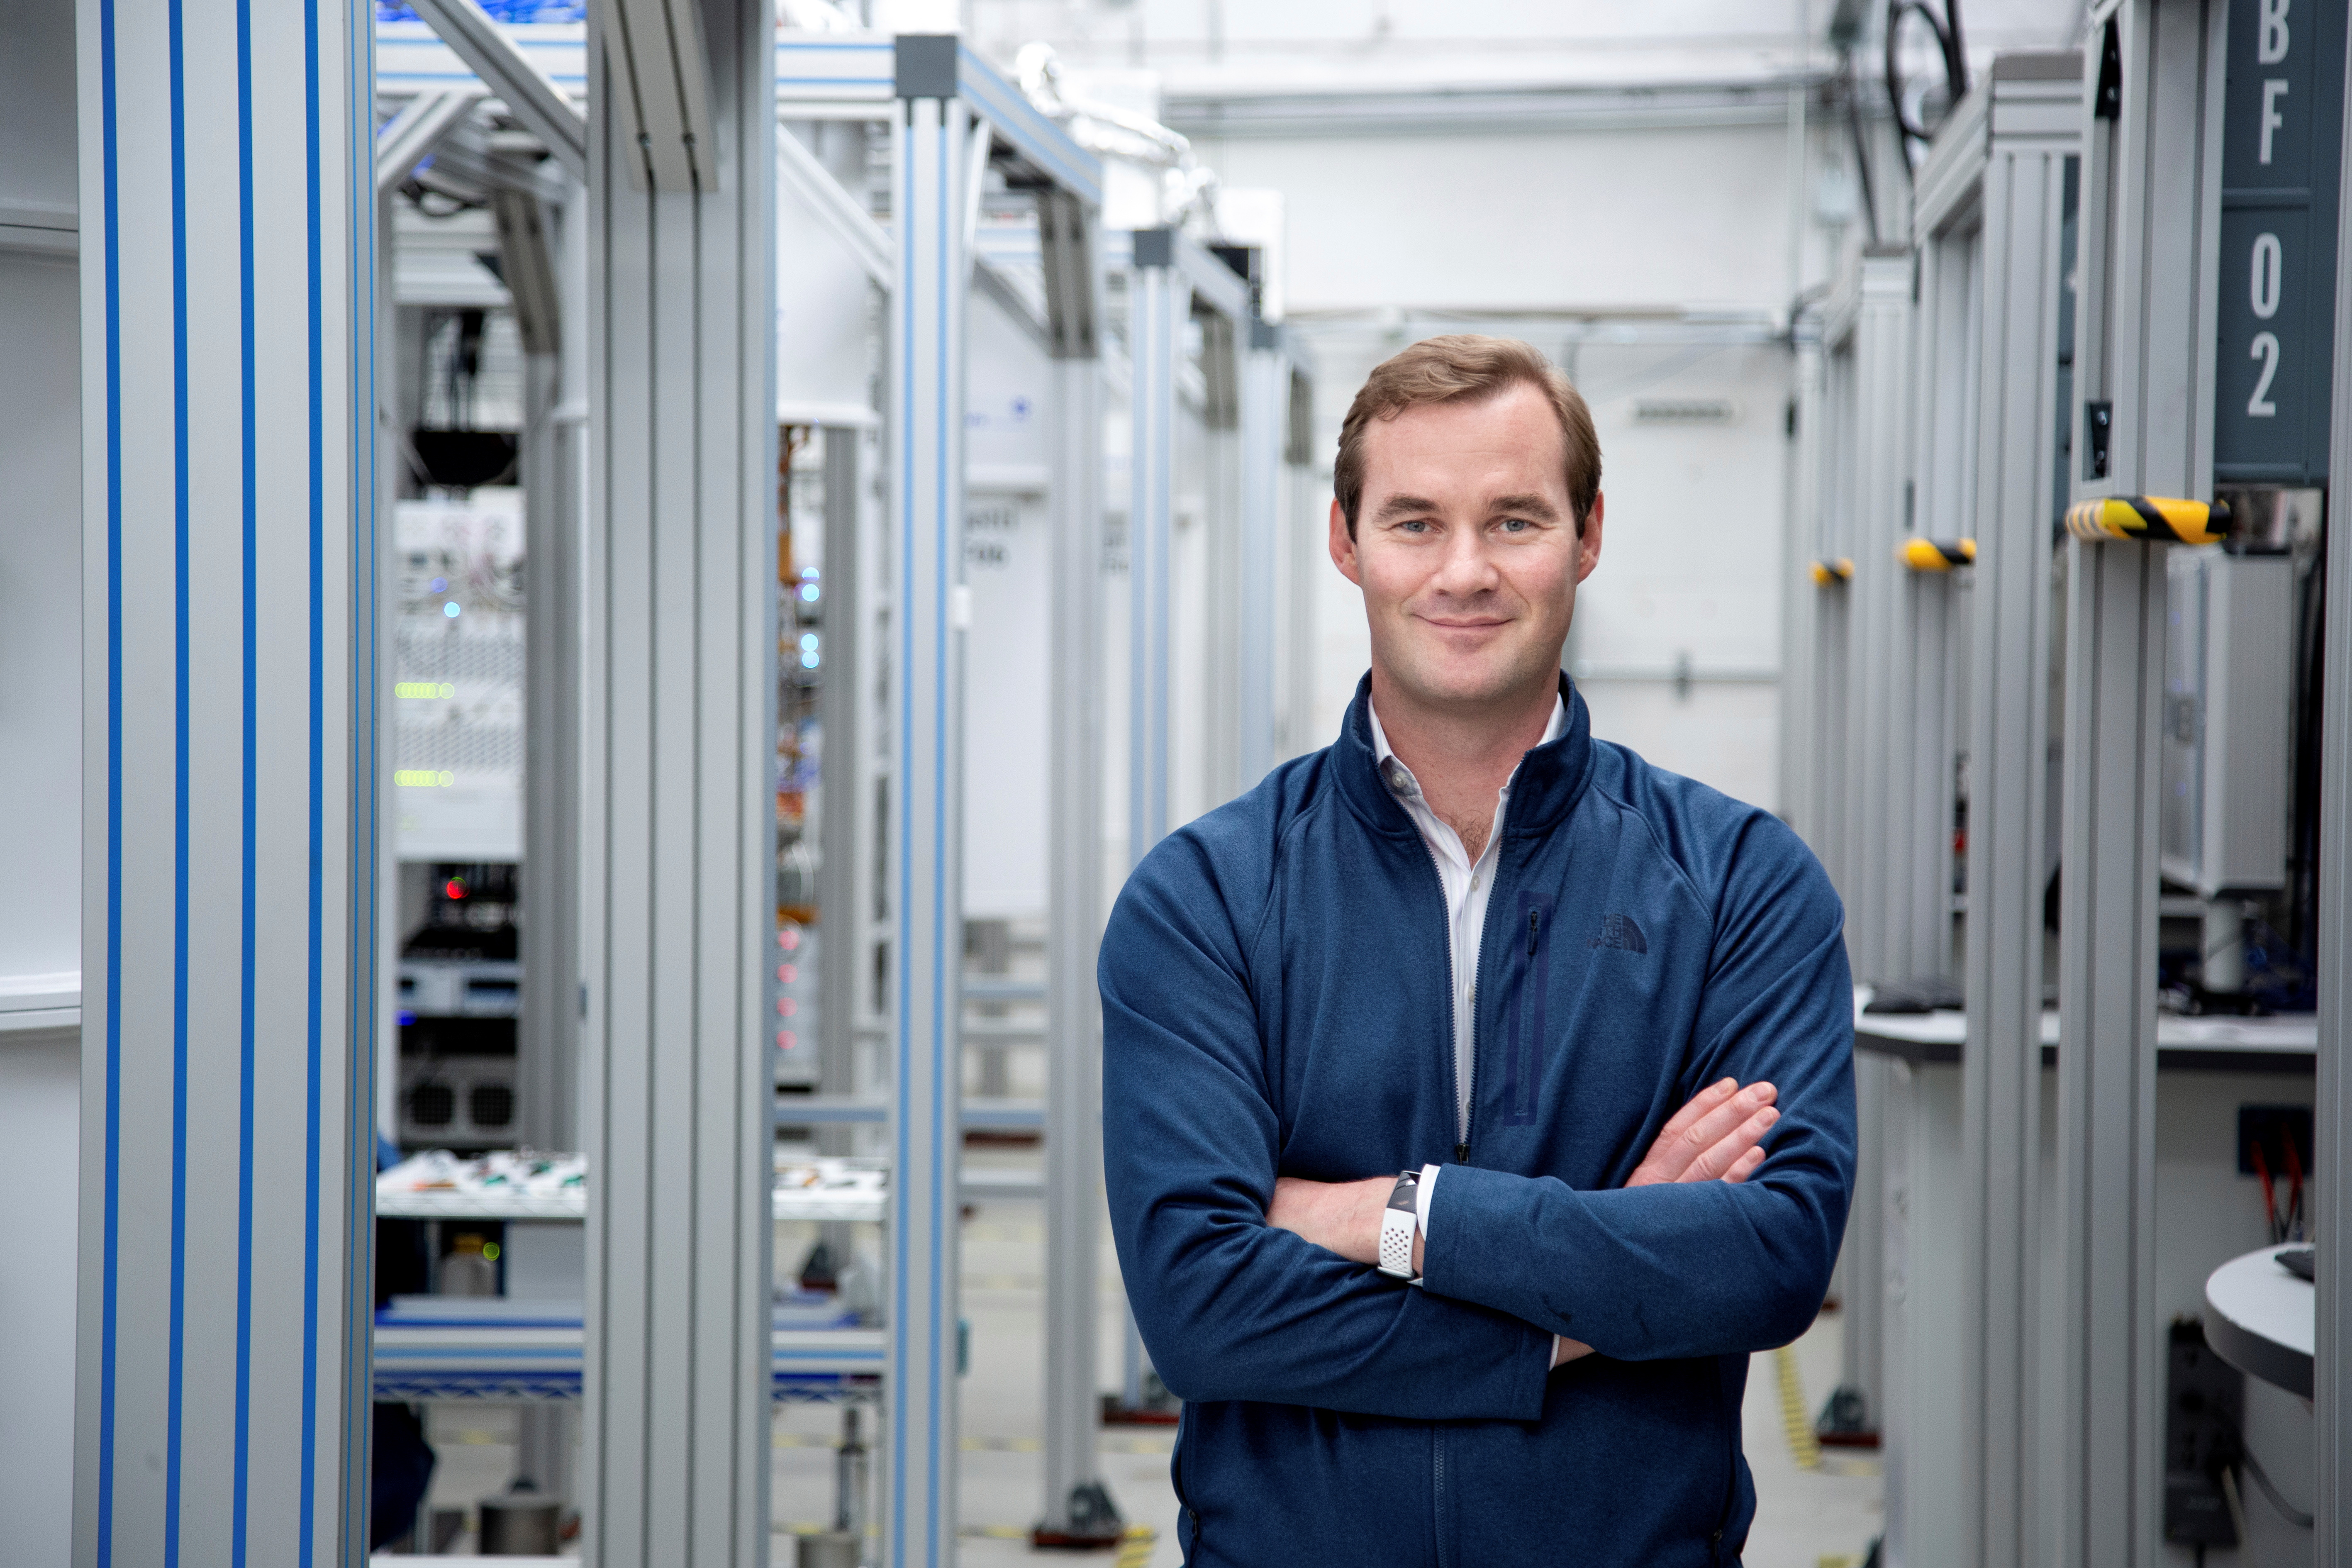 Chad Rigetti, founder and CEO of quantum computer maker Rigetti & Co, poses in the lab in Berkeley, California